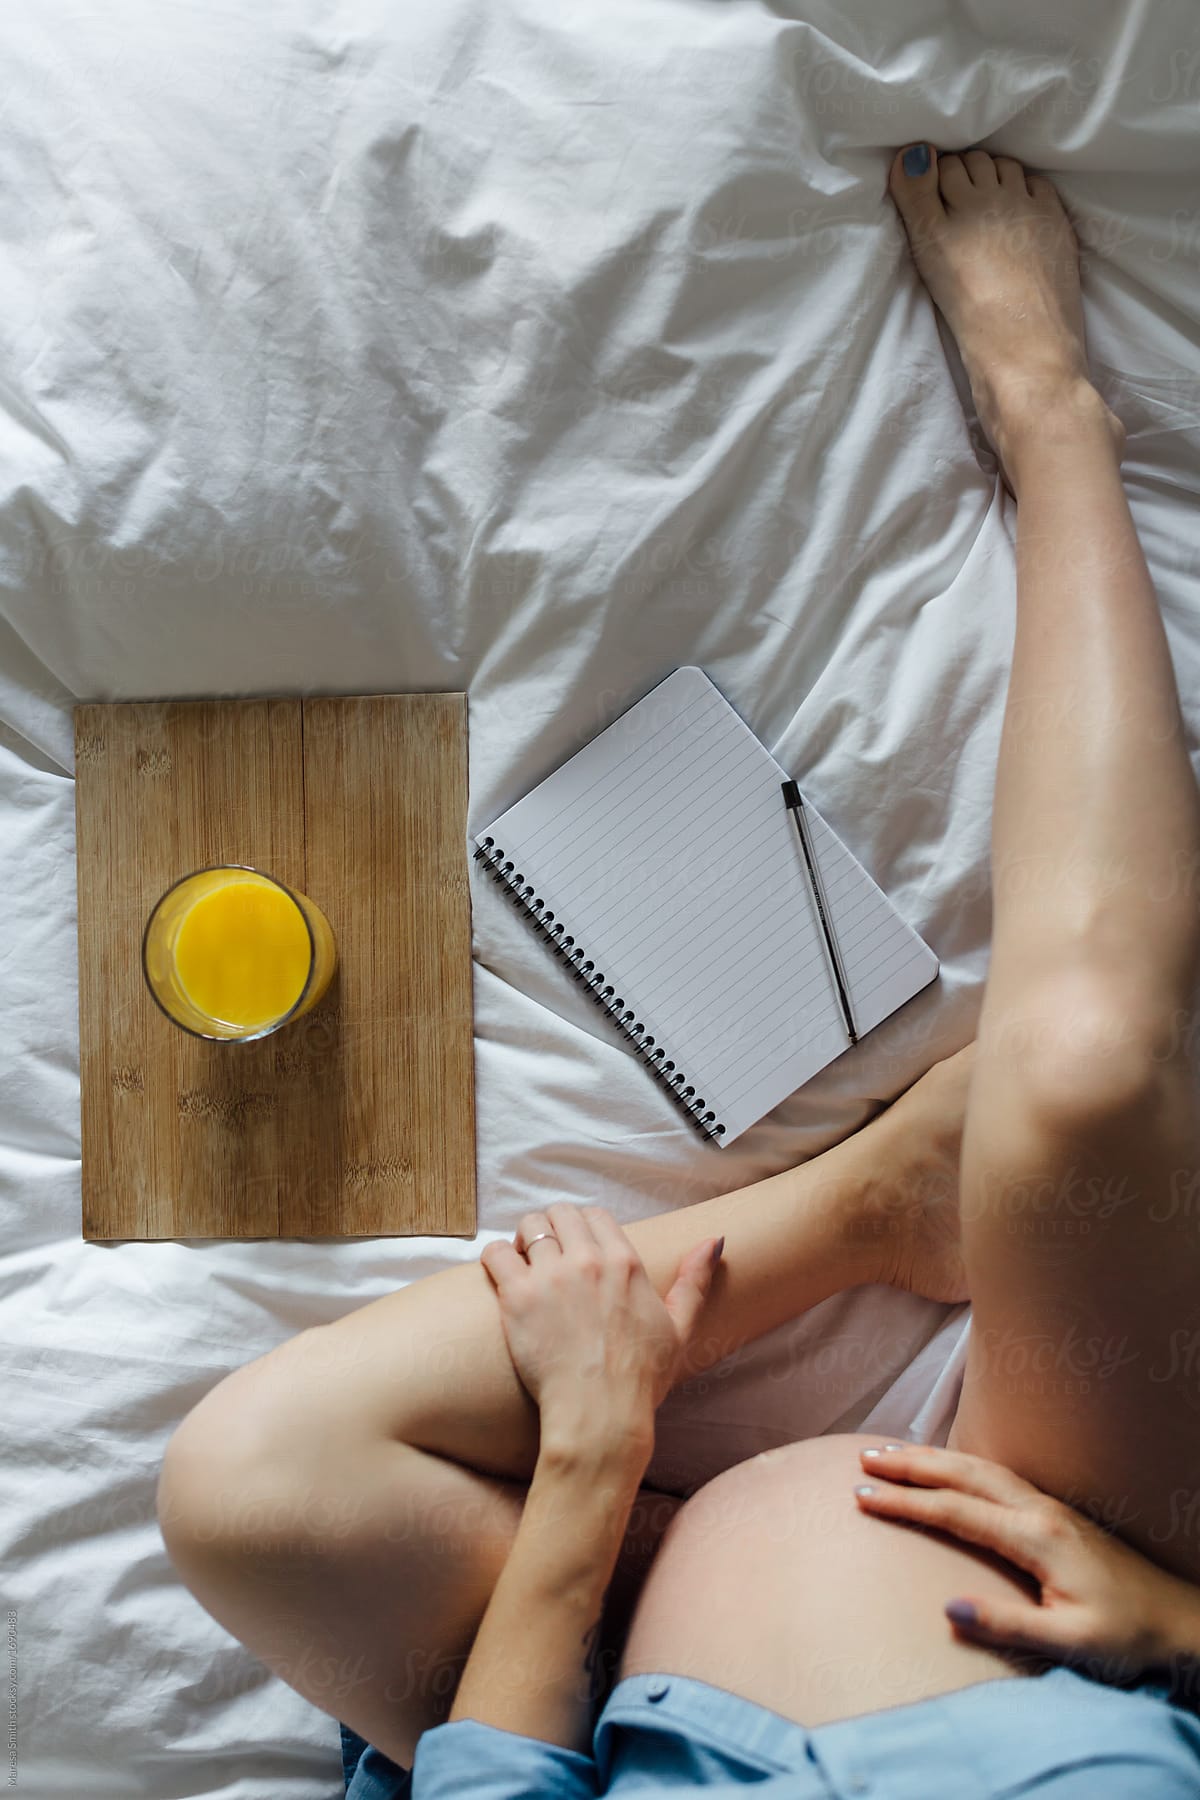 A pregnant women\'s bare legs and tummy from above. A glass of orange juice and a blank notebook are on the white sheeted bed.